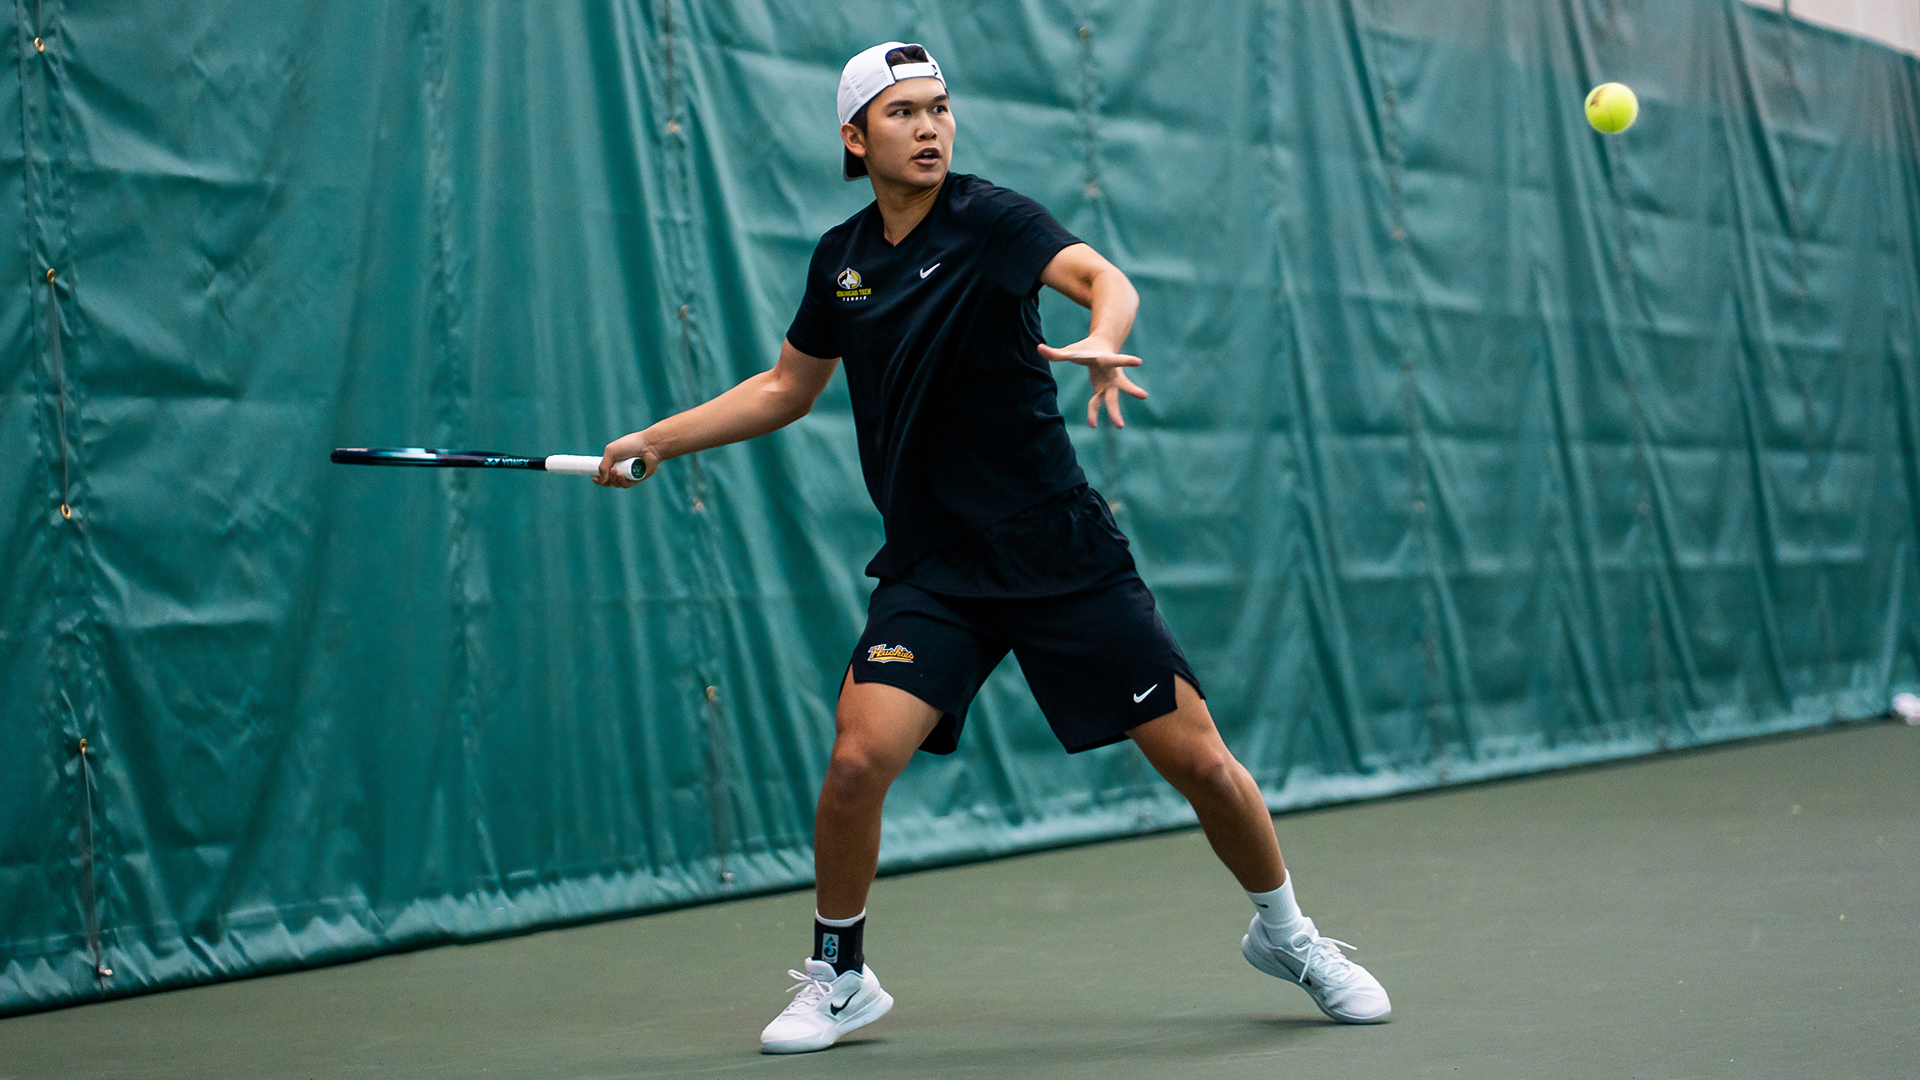 Tech Tennis competed in Detroit on Saturday